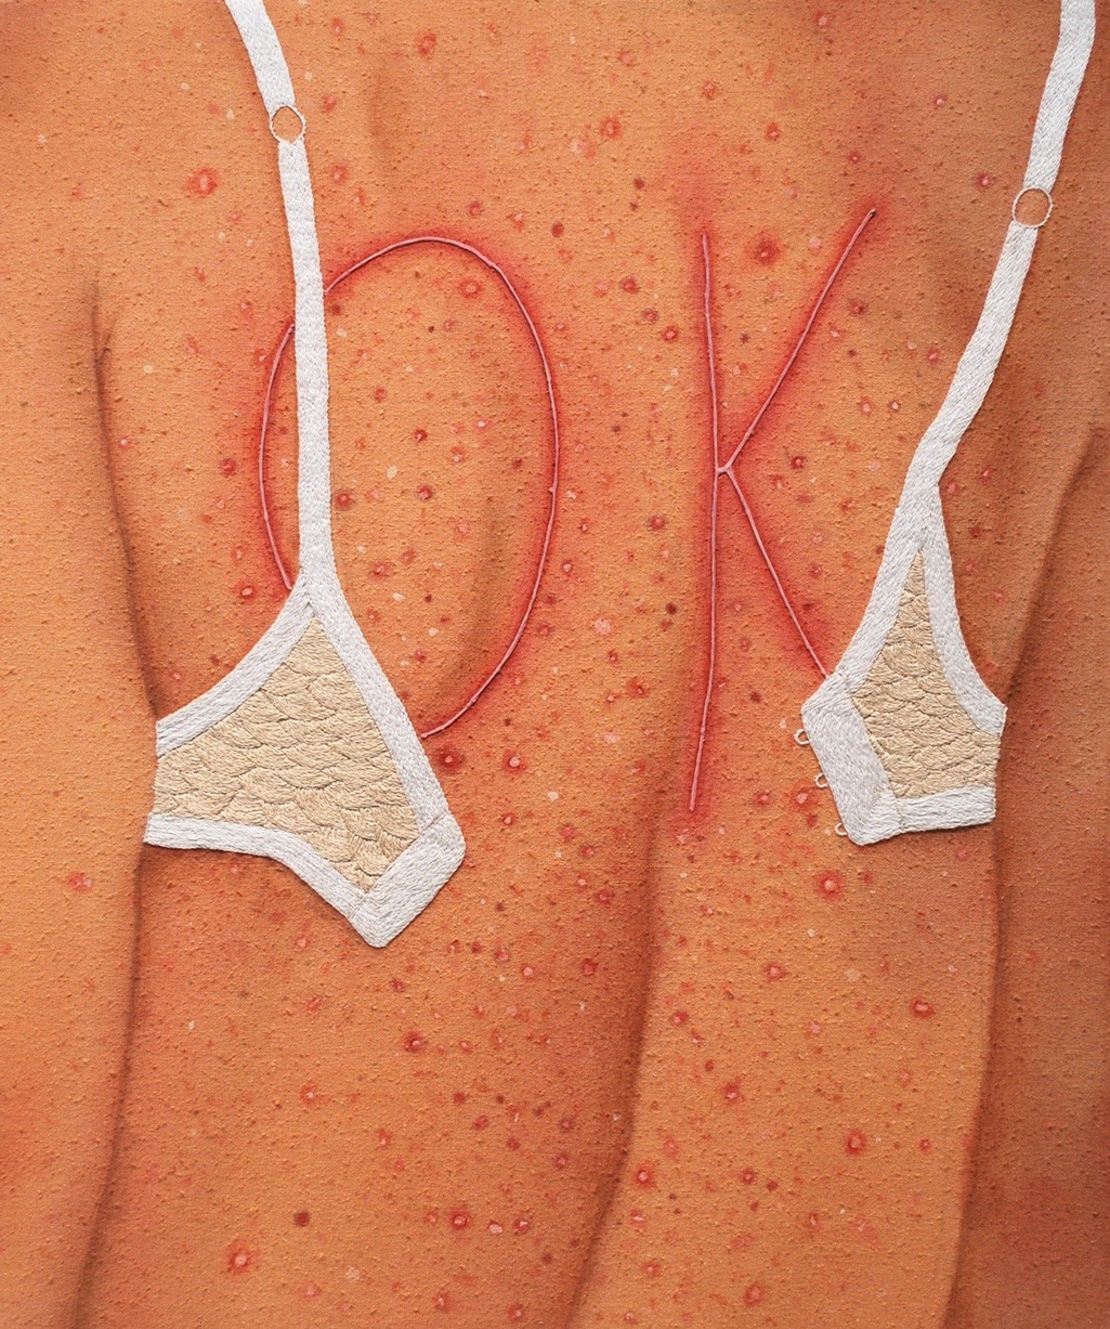 "OK" by Katarina Riesing (2018). Riesing's work highlights seeming imperfections in skin -- acne, scratches and even scars.